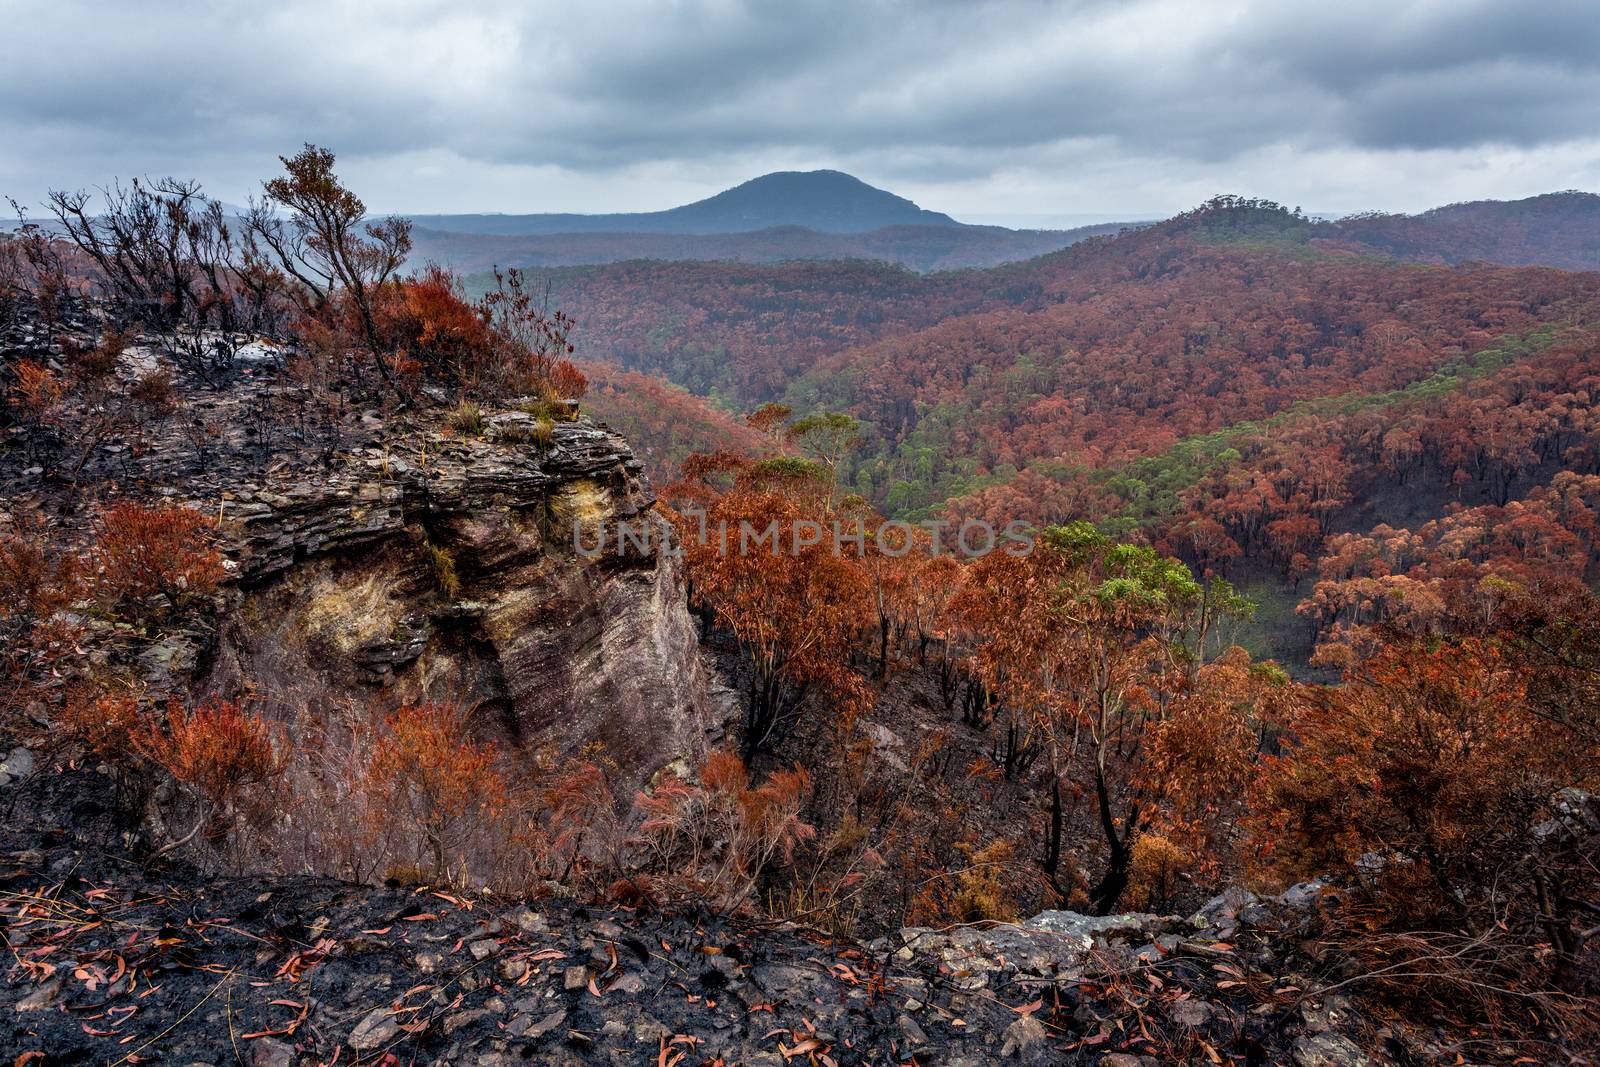 Landscape views after bush fires destroyed bush land in Blue Mountains.  Vistas of mountains and valleys with burnt and unburnt areas